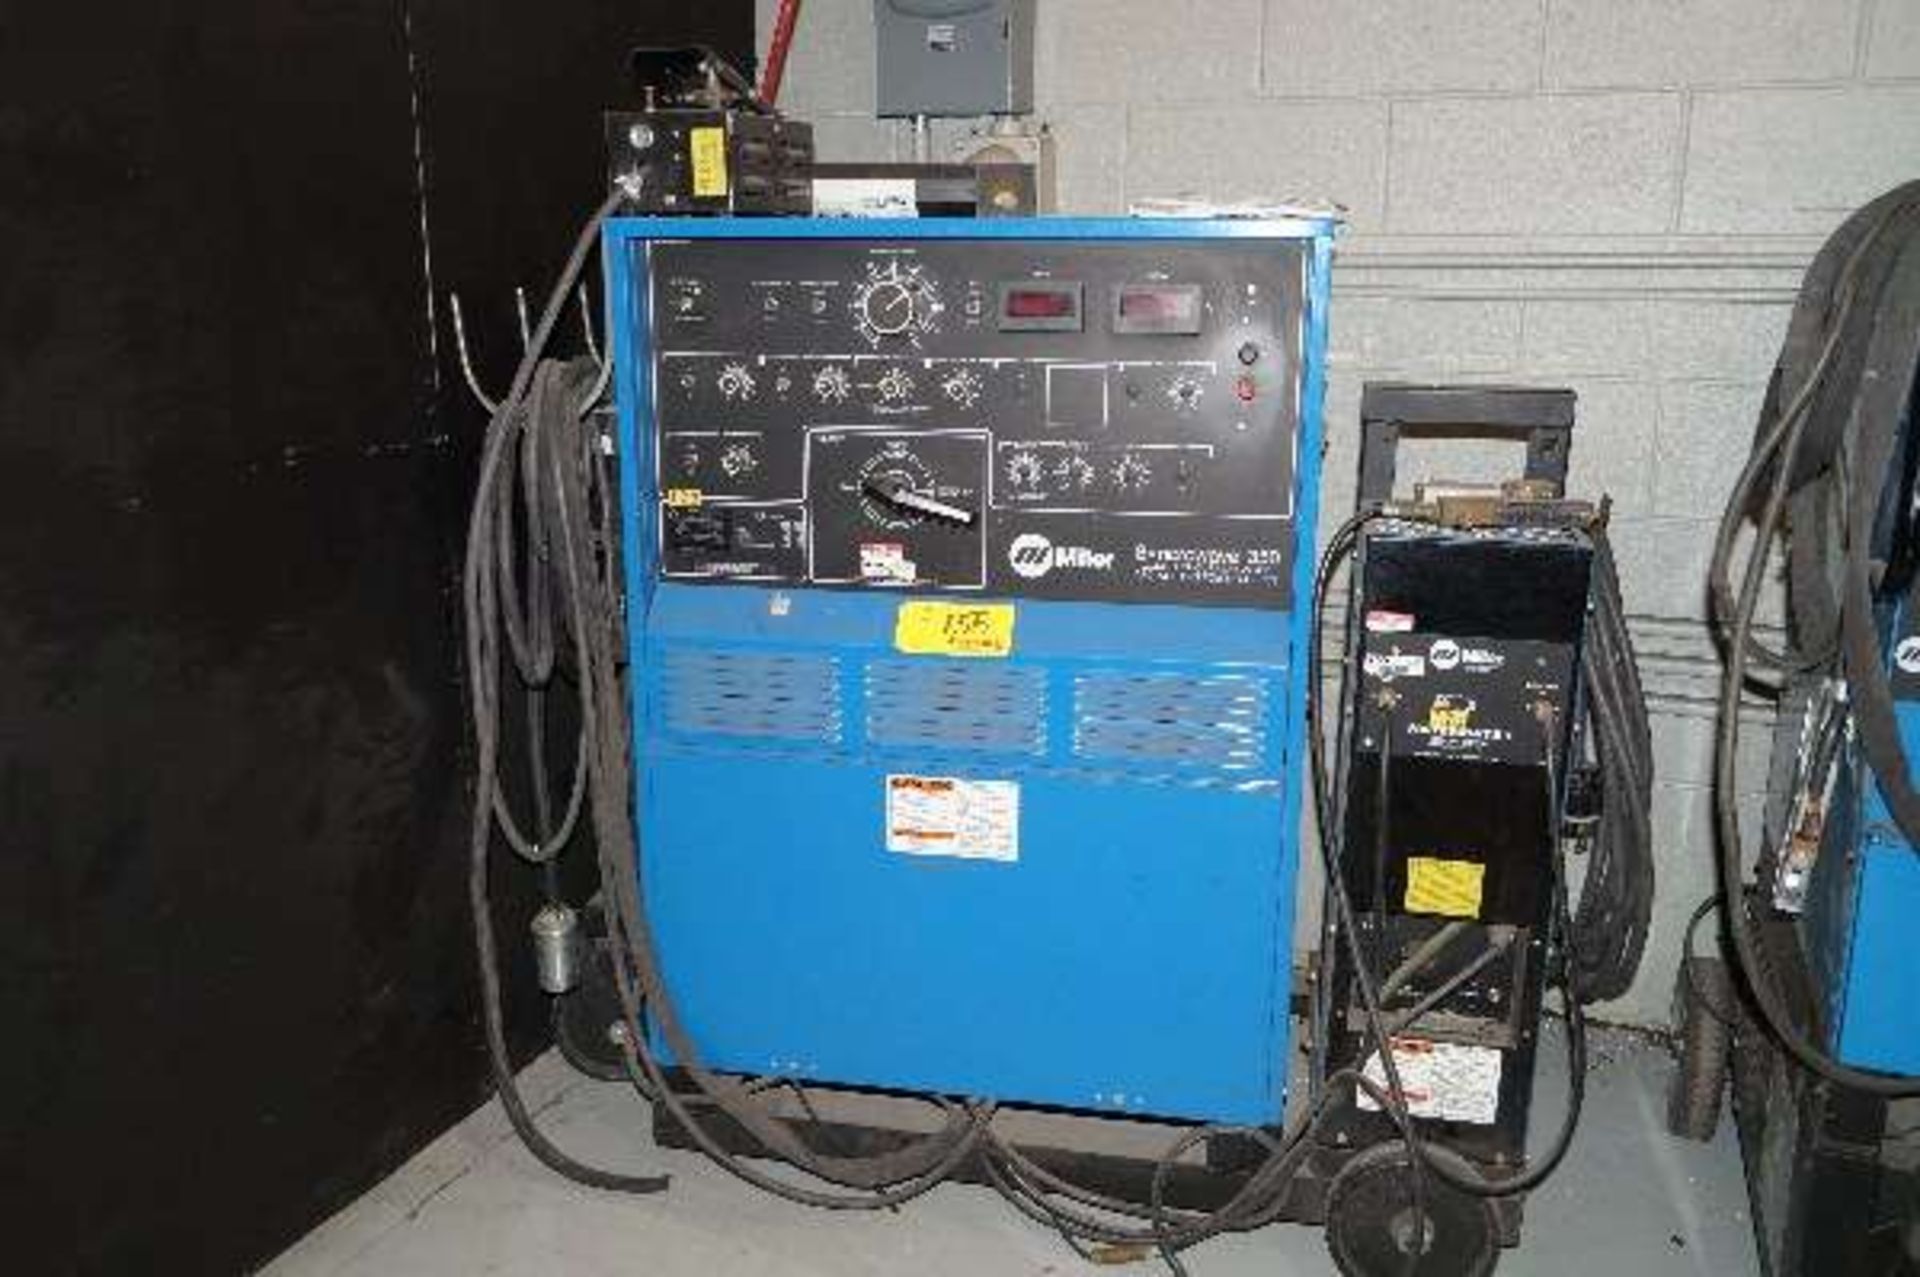 Miller SyncroWave 350 Welding Power Source